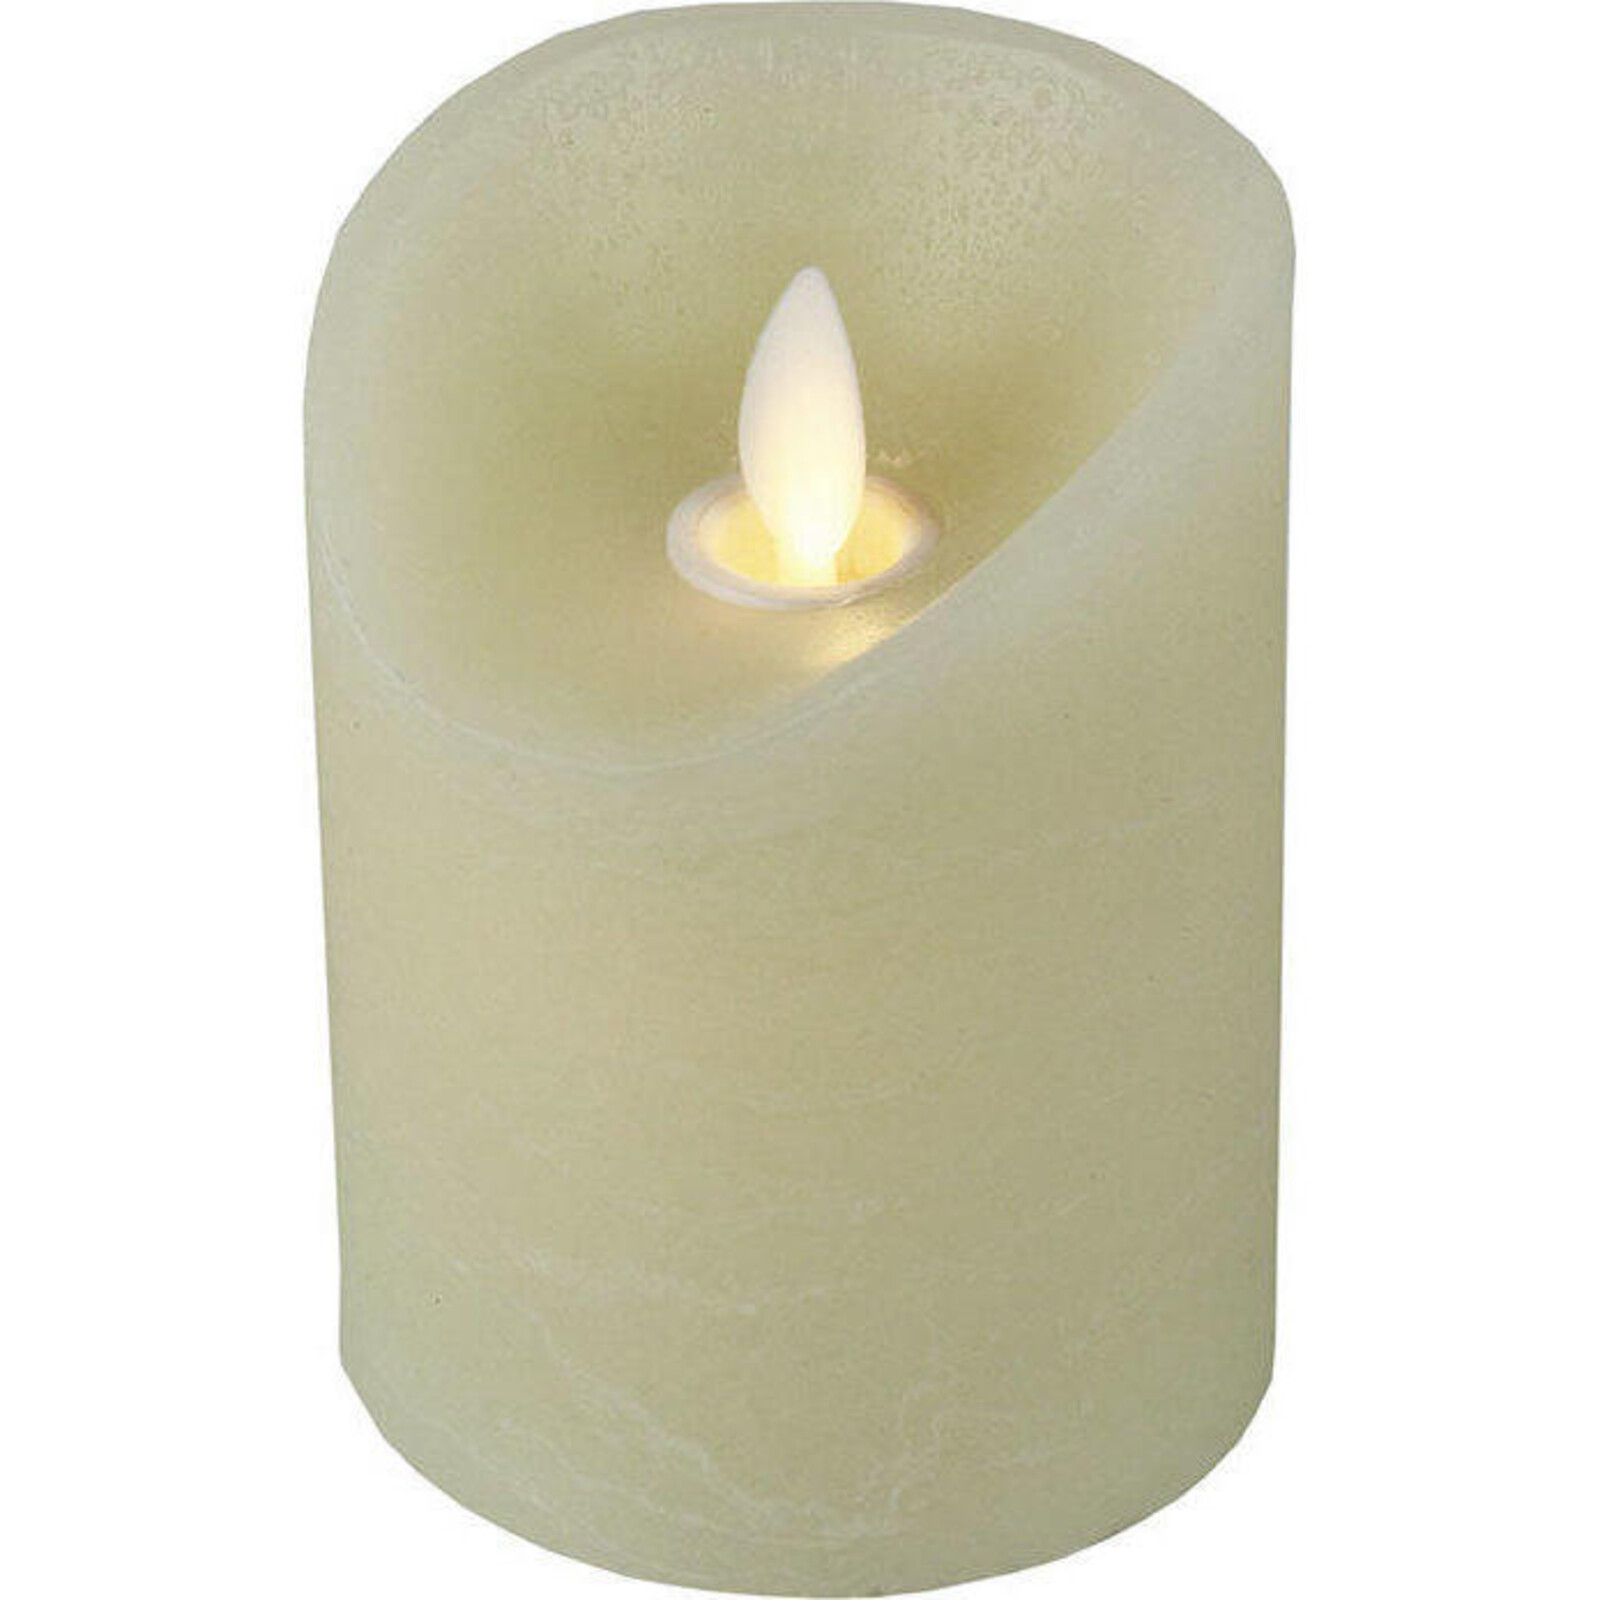 Flameless Candle Small Timer